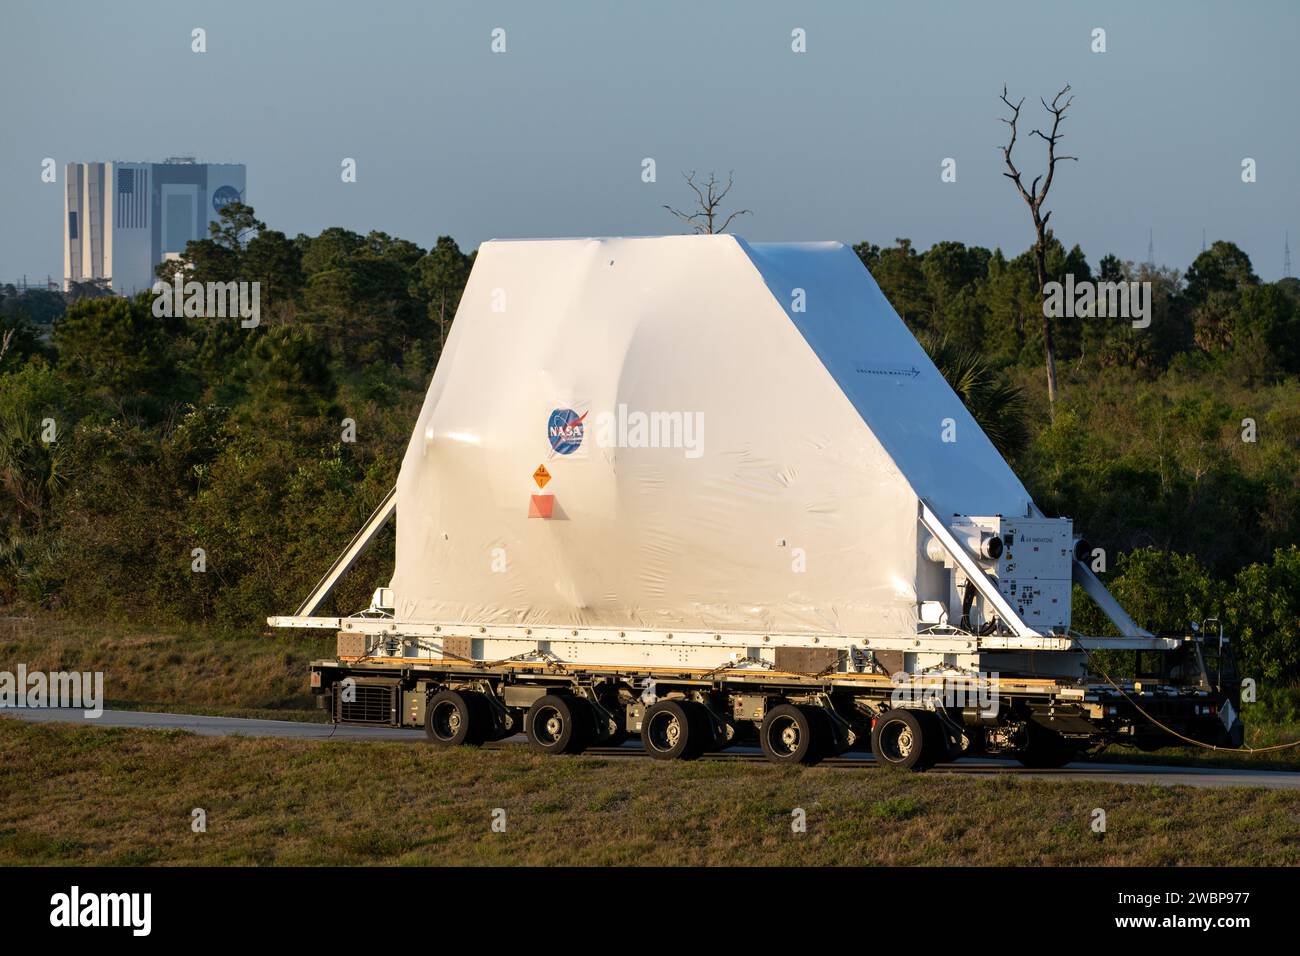 NASA’s Orion spacecraft, protected in its shipping container, is loaded onto a transporter at the Launch and Landing Facility at Kennedy Space Center for its move to the Neil Armstrong Operations and Checkout Building on March 25, 2020. After testing at NASA’s Plum Brook Station in Ohio verified it can handle the extreme conditions of a deep-space environment, the spacecraft – carried by the agency’s Super Guppy aircraft – has returned to the Florida spaceport for final testing and assembly. Following this, Orion will be integrated with the Space Launch System rocket for Artemis I – the first Stock Photo